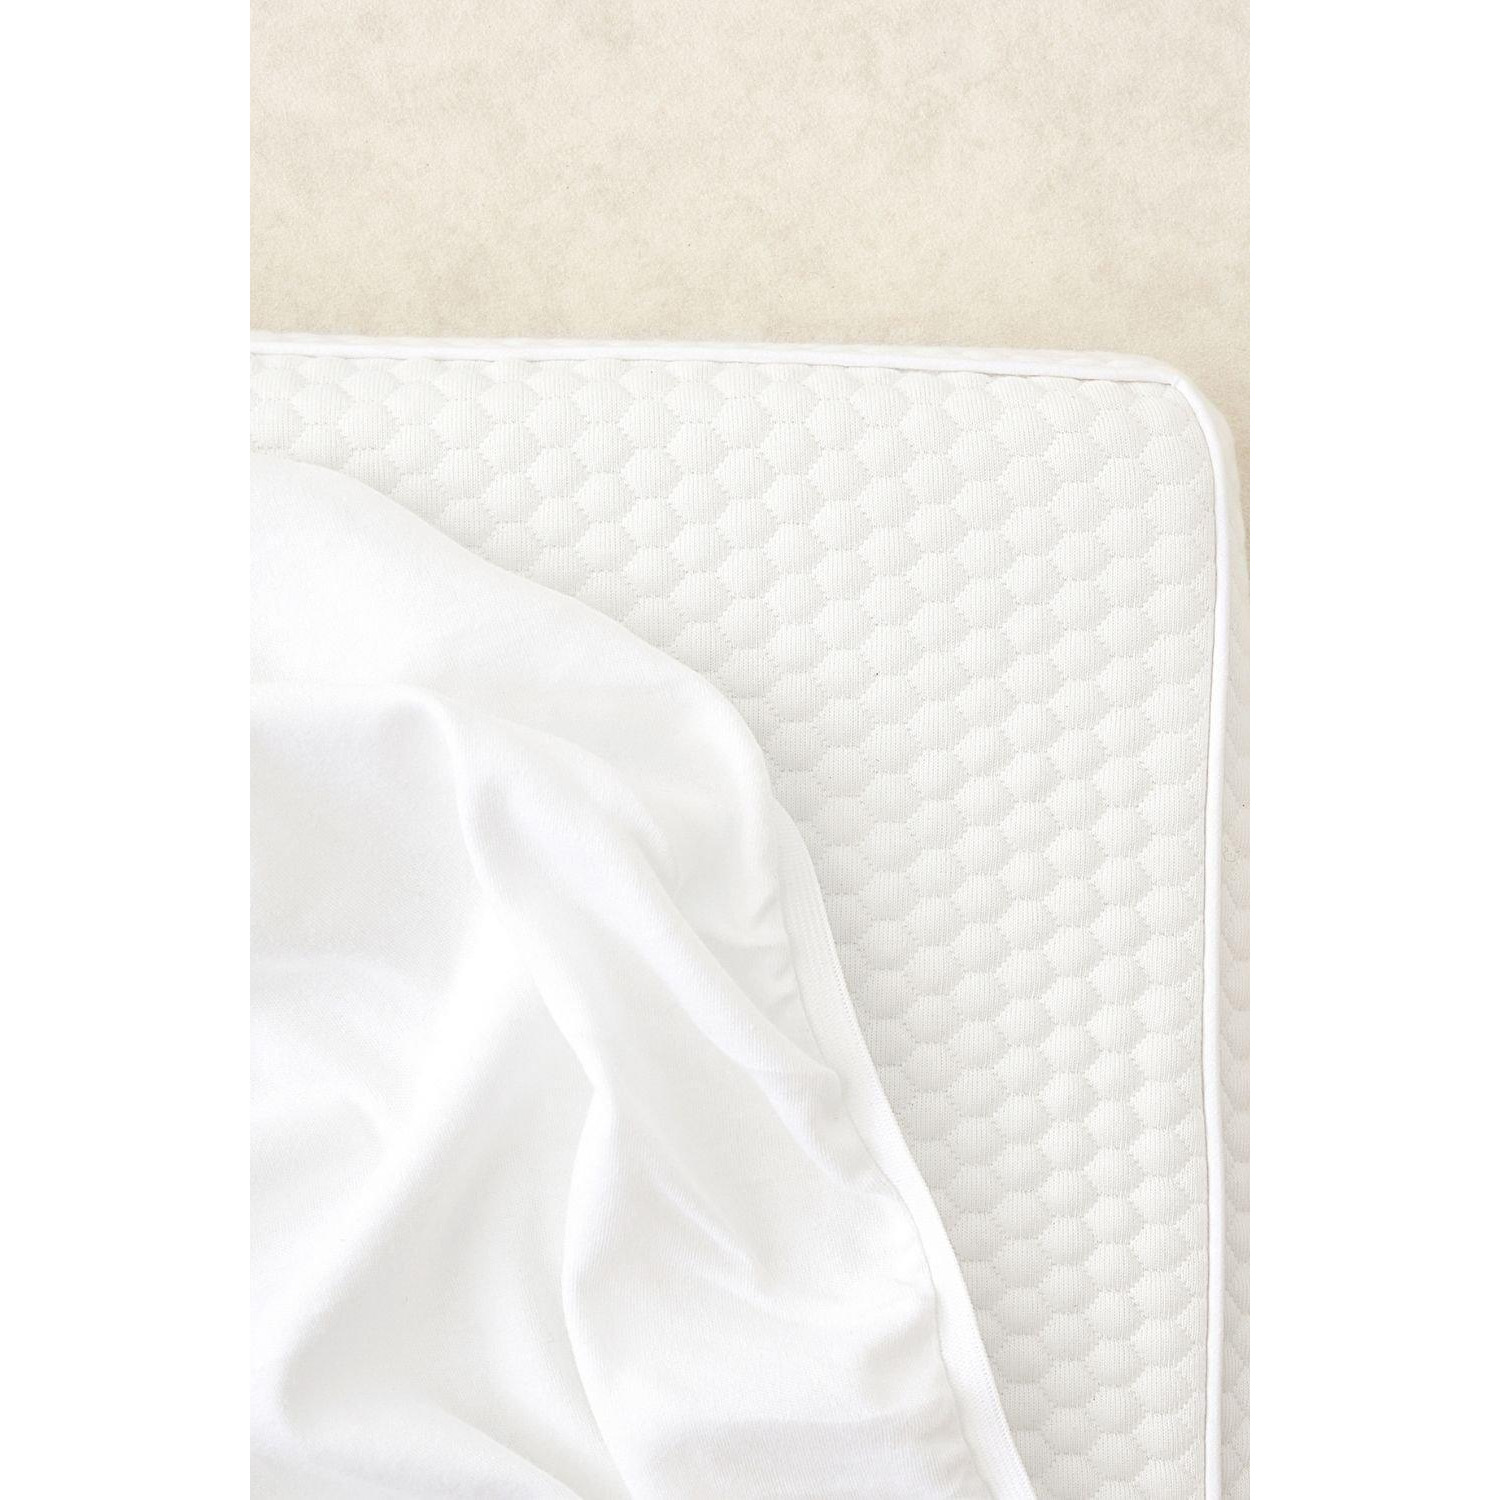 Premium Quality Certified Organic 100% Cotton Fitted Sheet  140 x 70cm - image 1